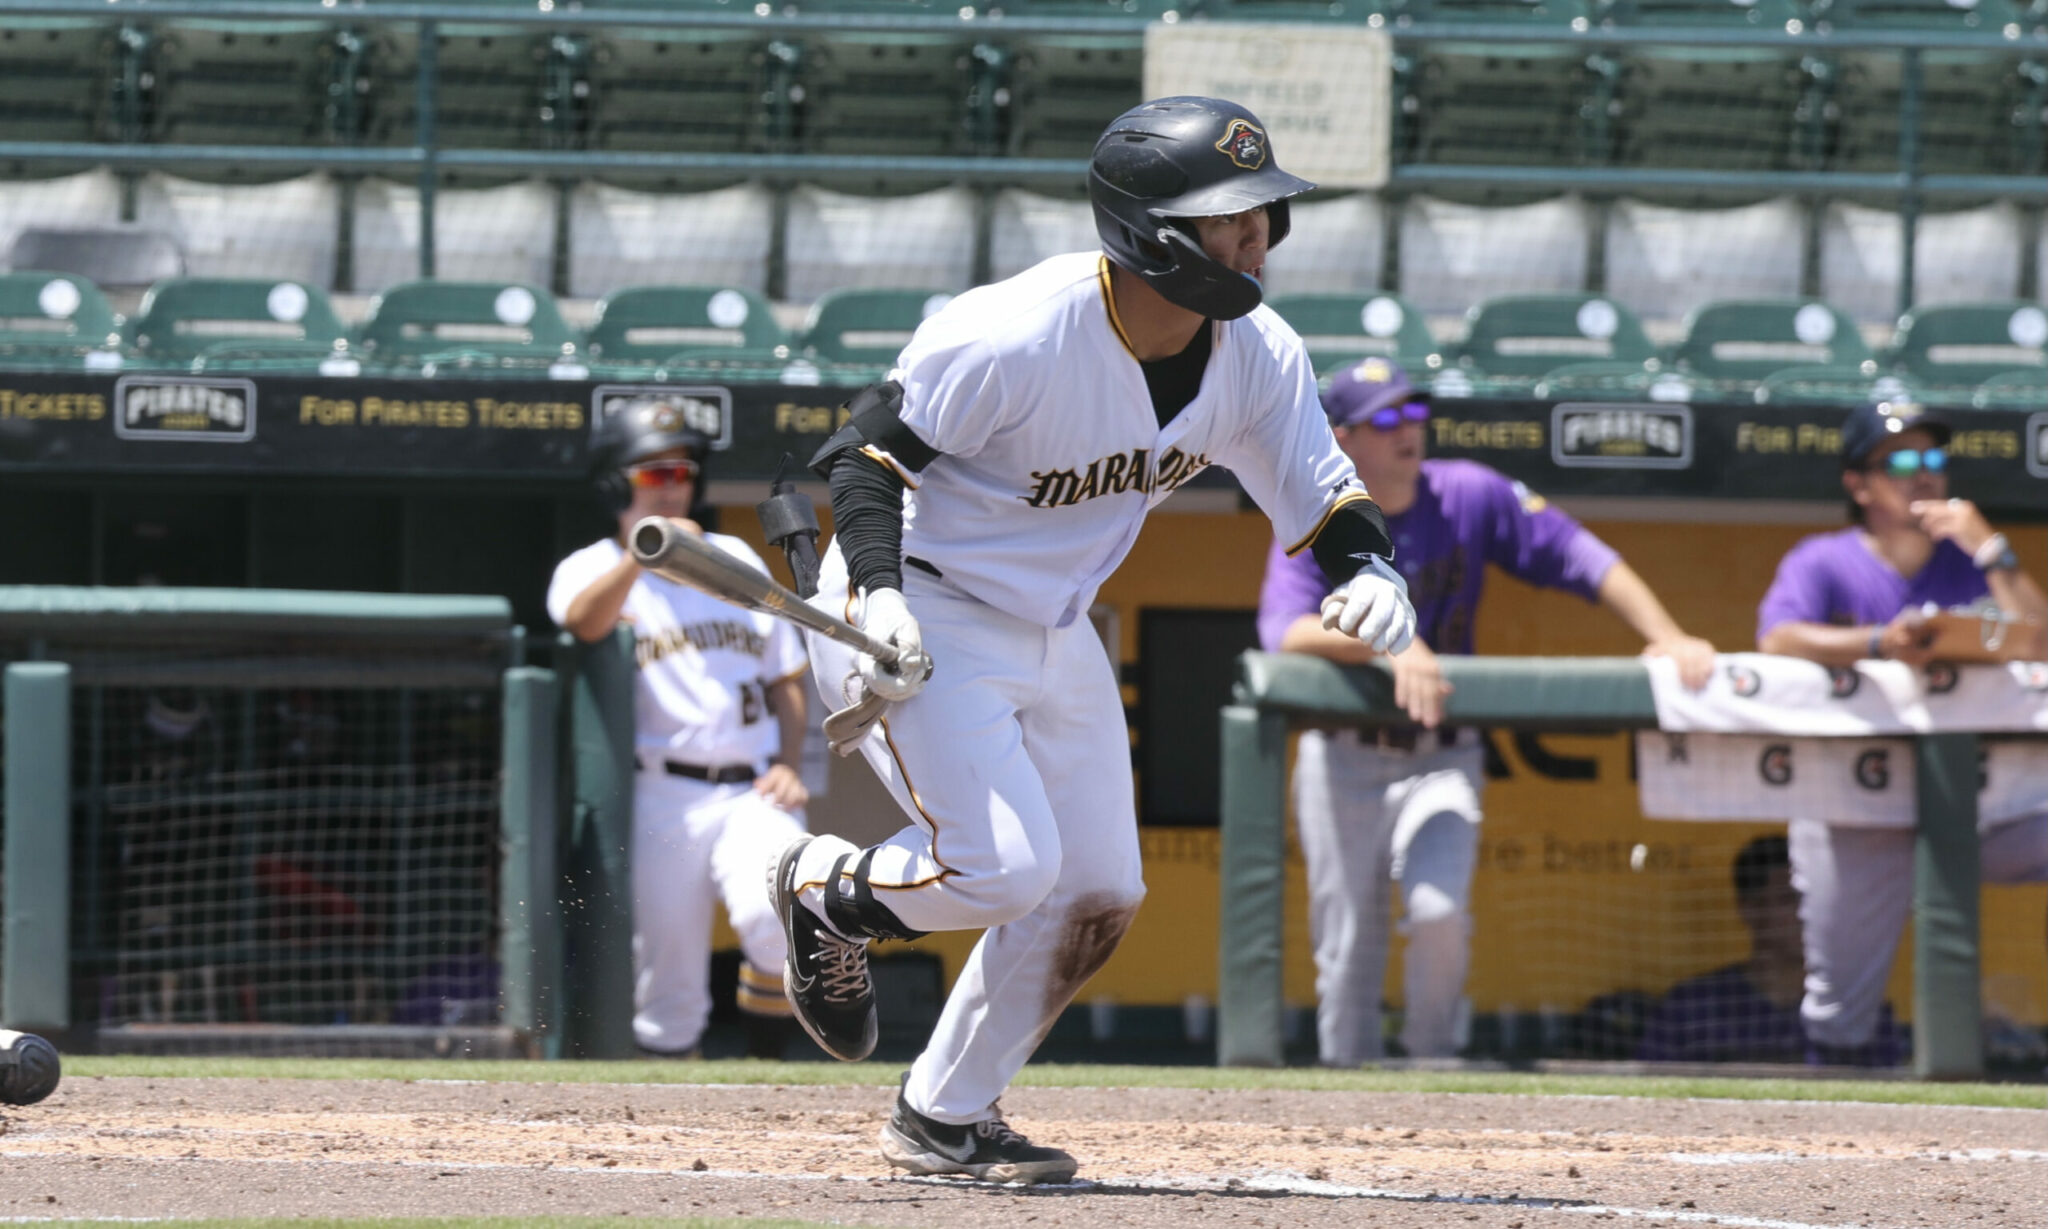 Pirates Top Performers: Cheng and Bido Shine in First Full Week in Minors